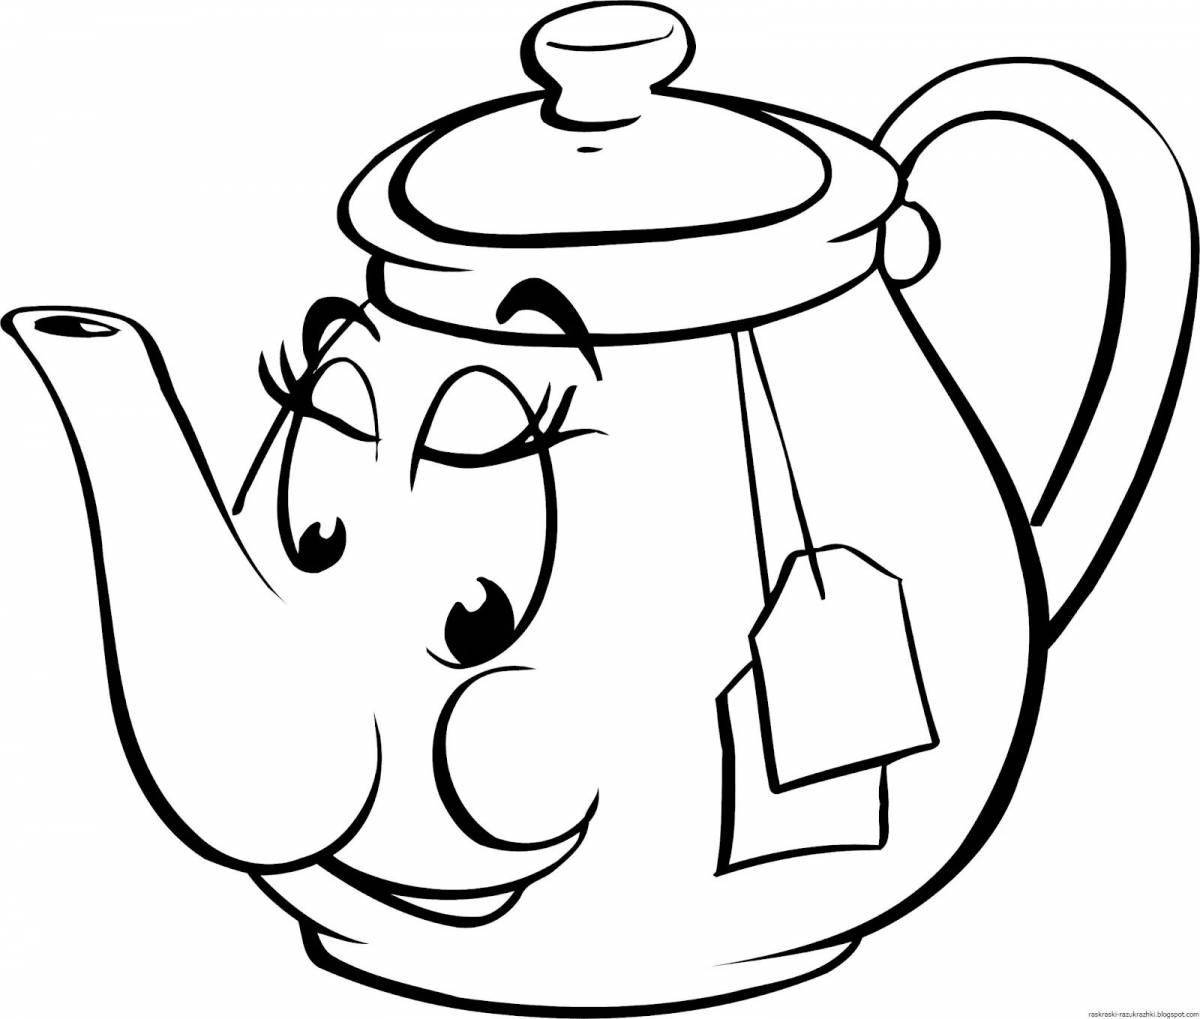 Small coloring book for children teapot